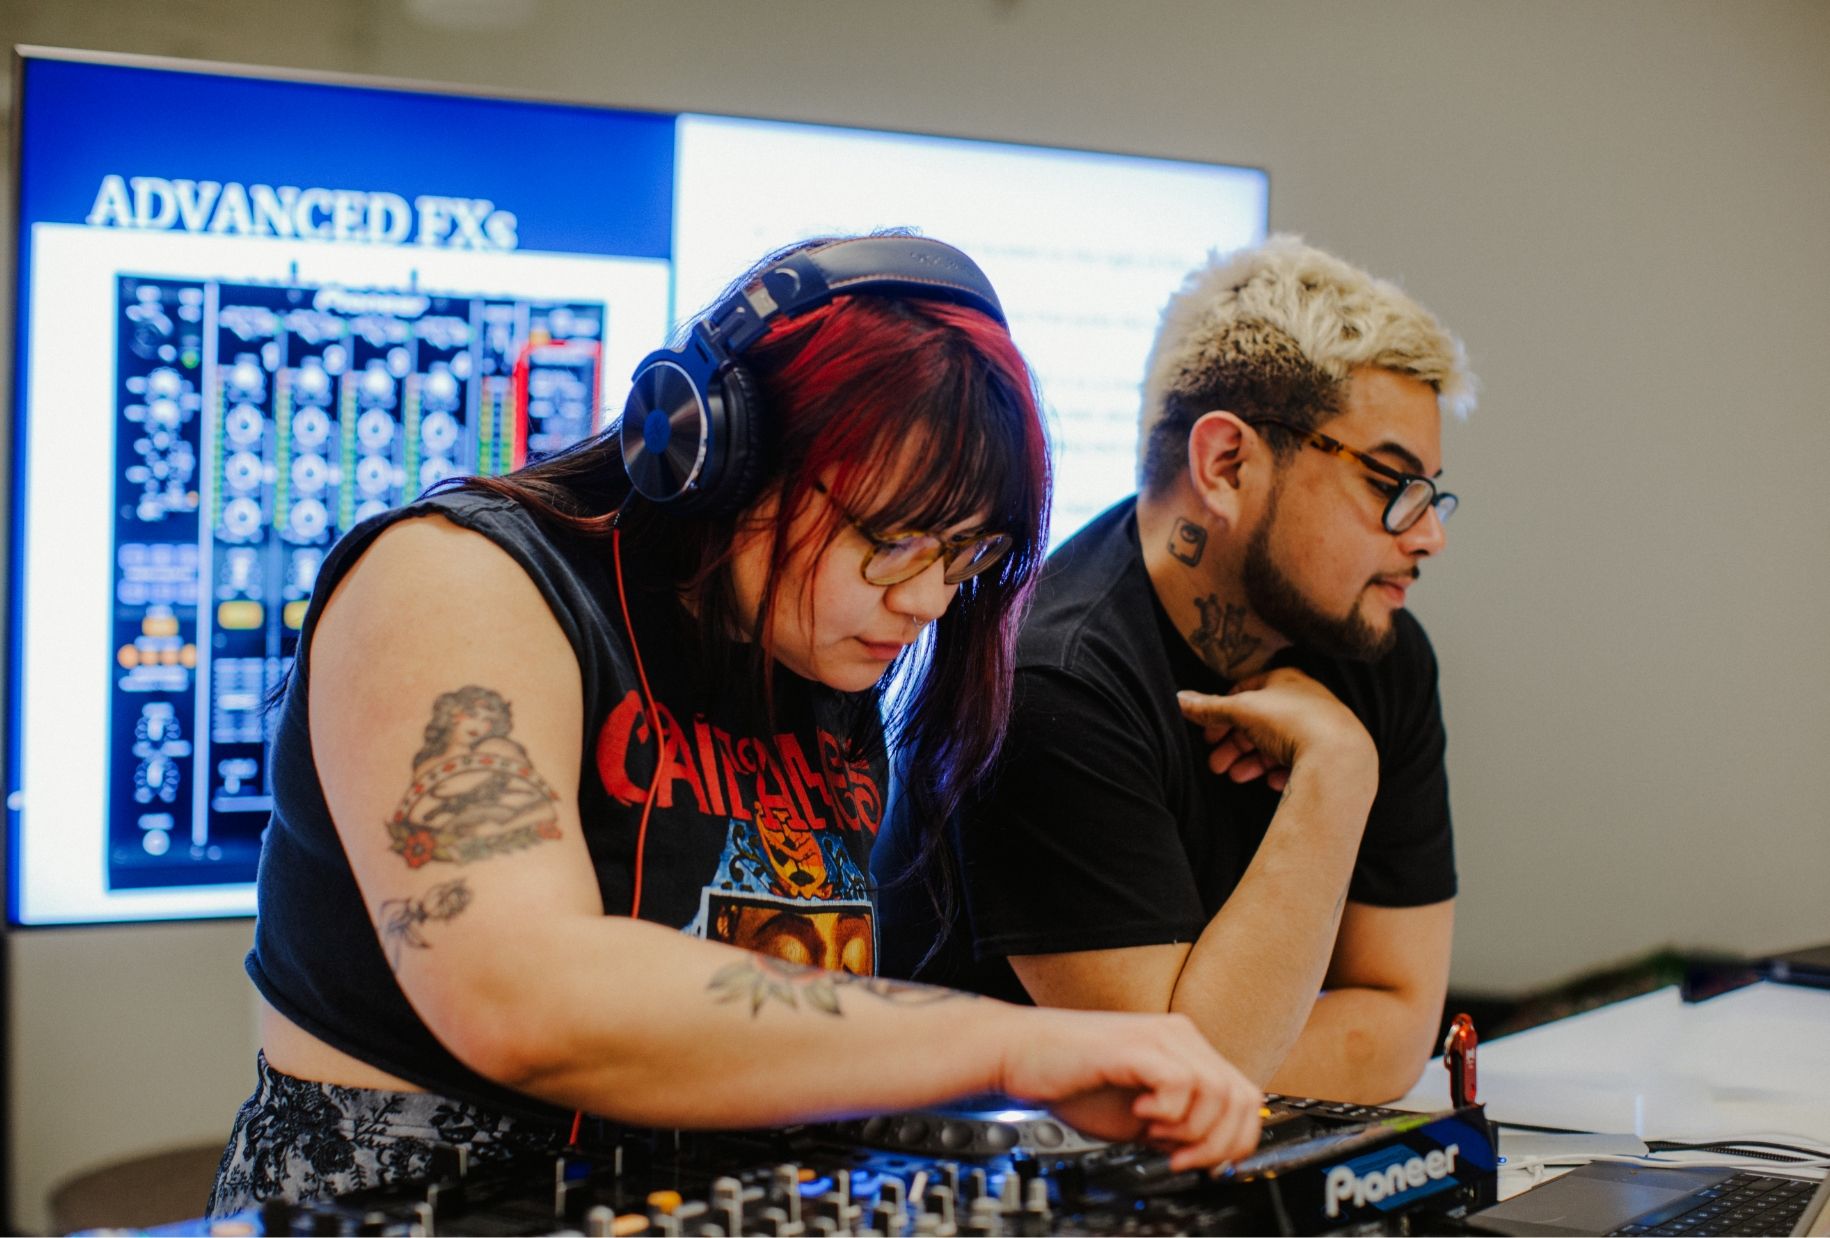 Two people stand behind a DJ mixer